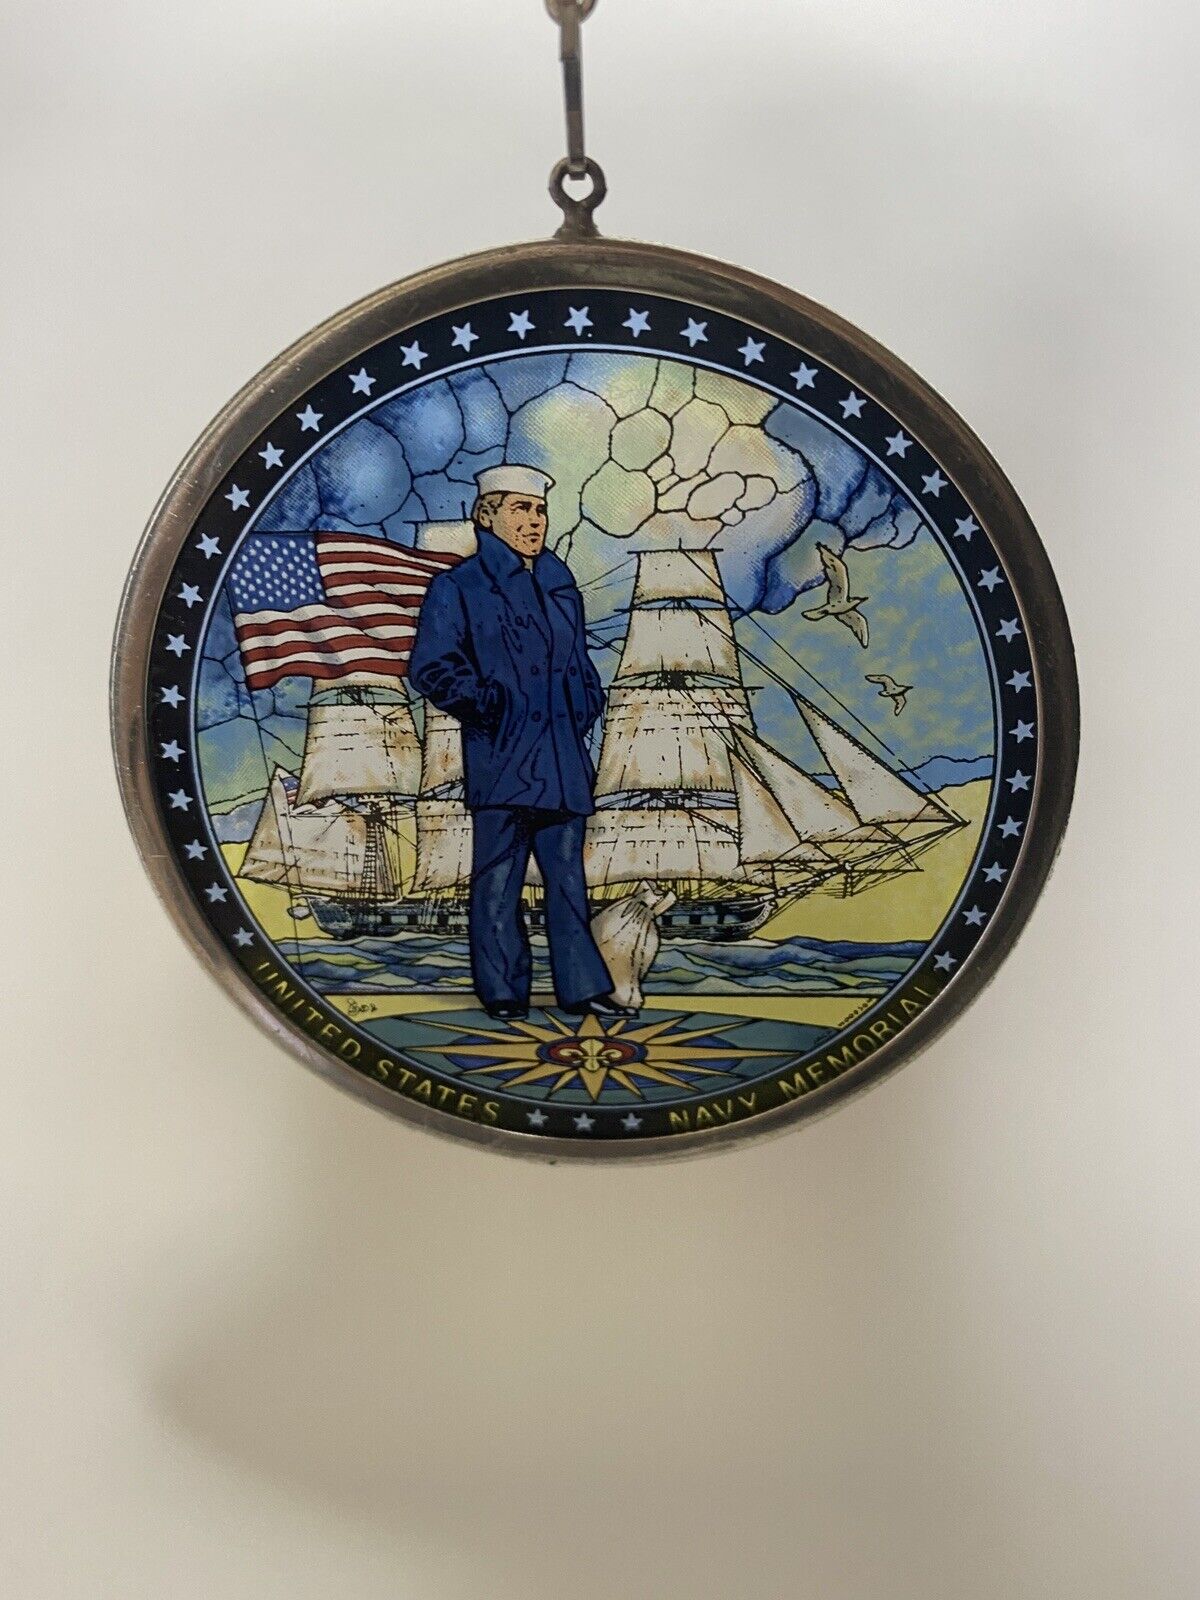 LONE SAILOR Stained Glass Ornament US Navy Memorial 1986 Jack Woodson